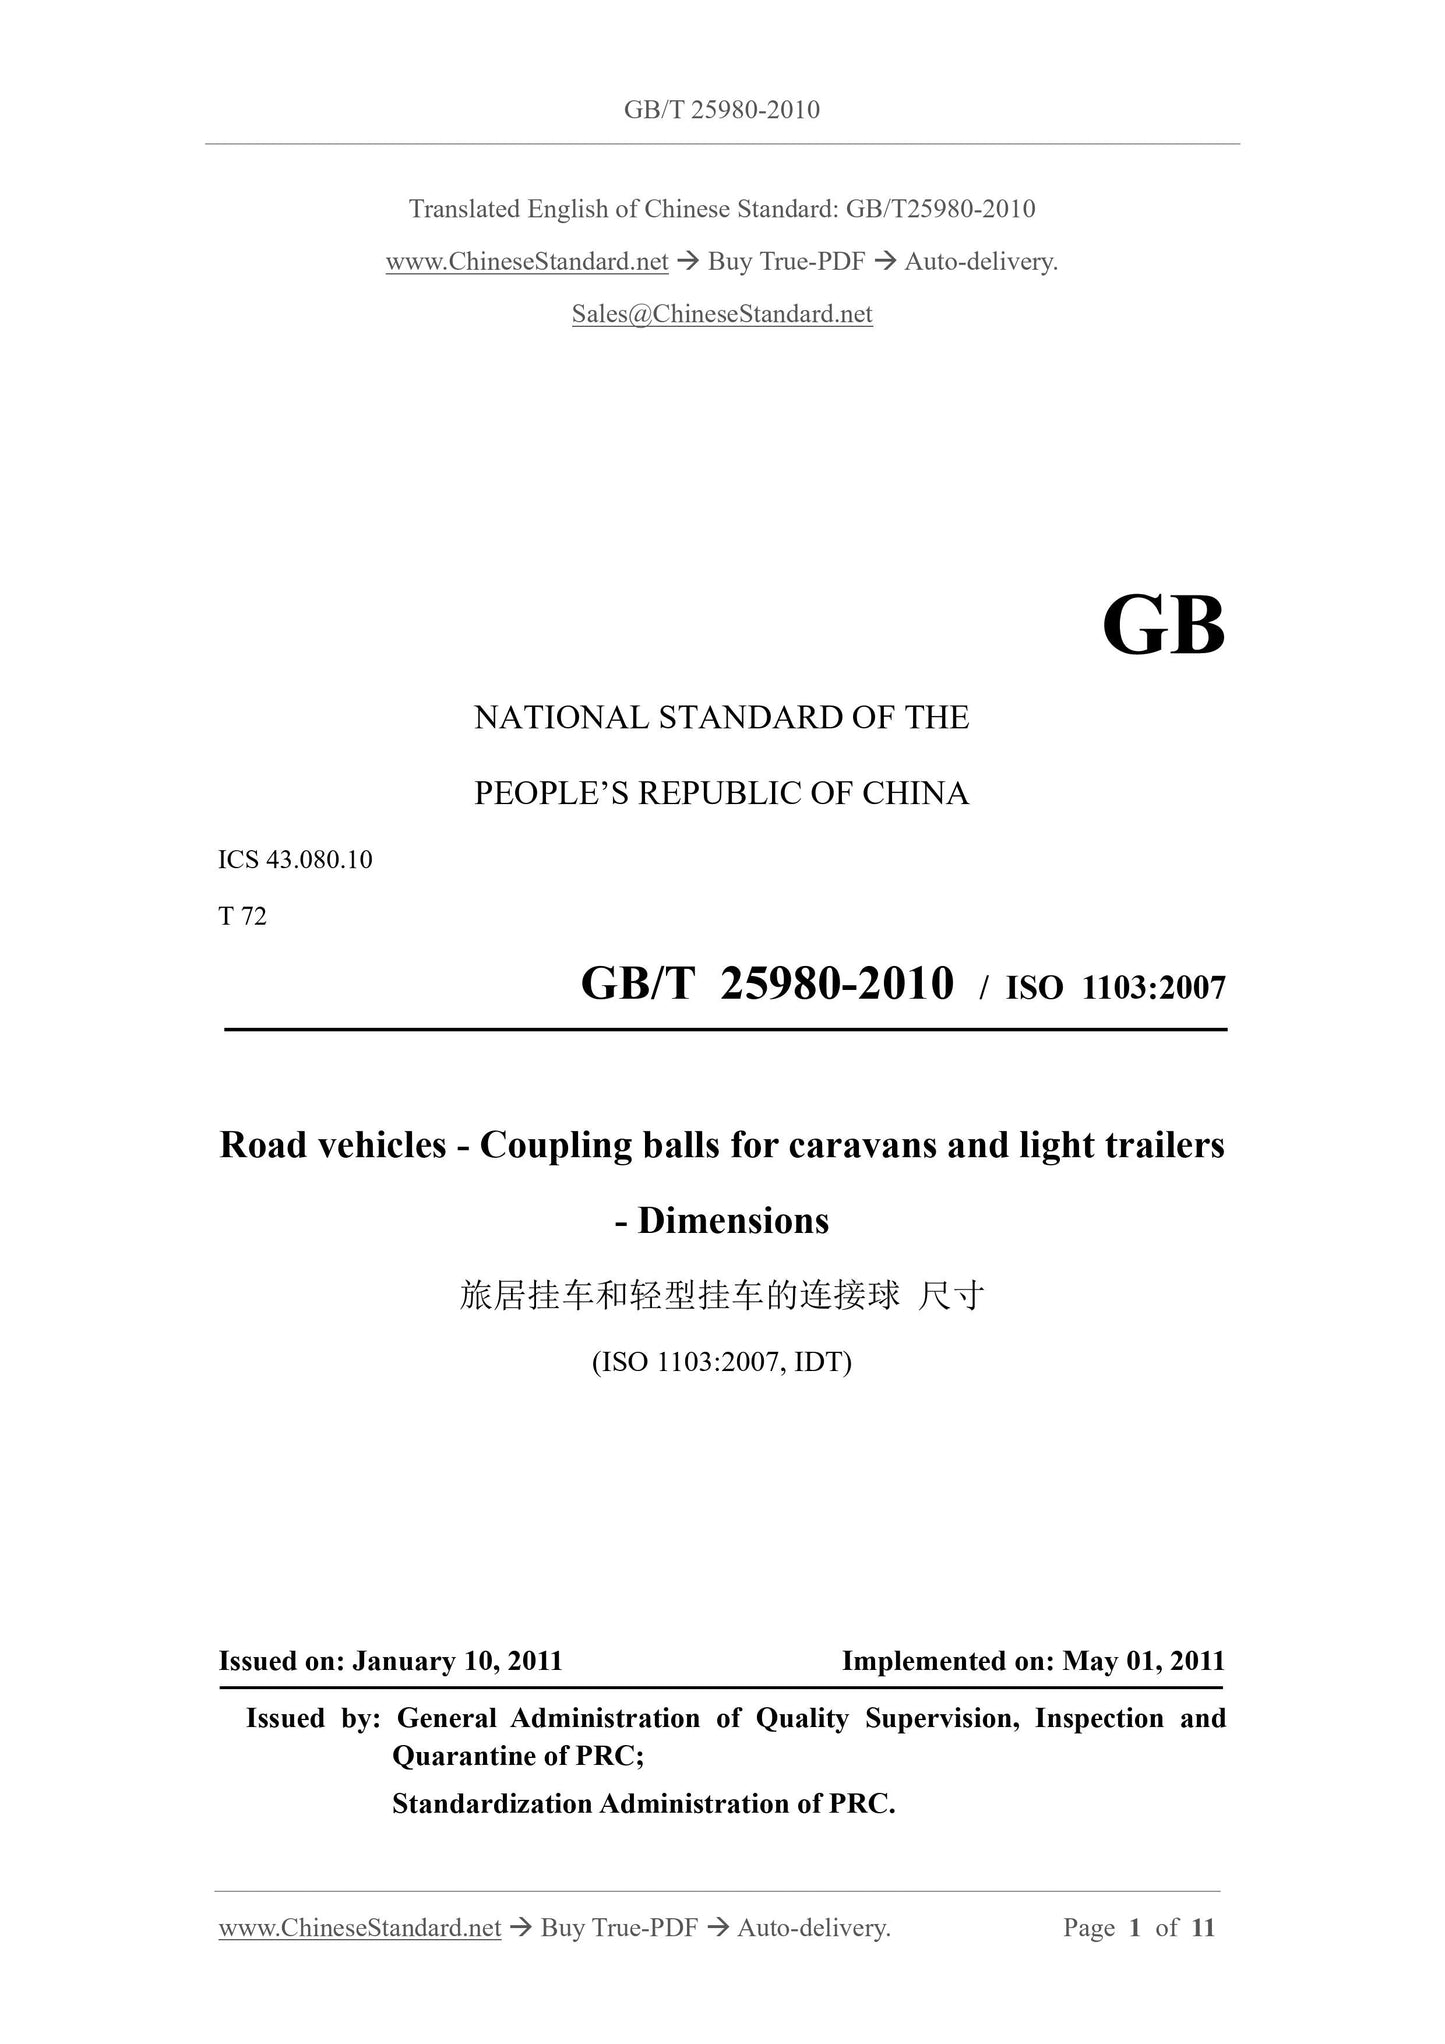 GB/T 25980-2010 Page 1